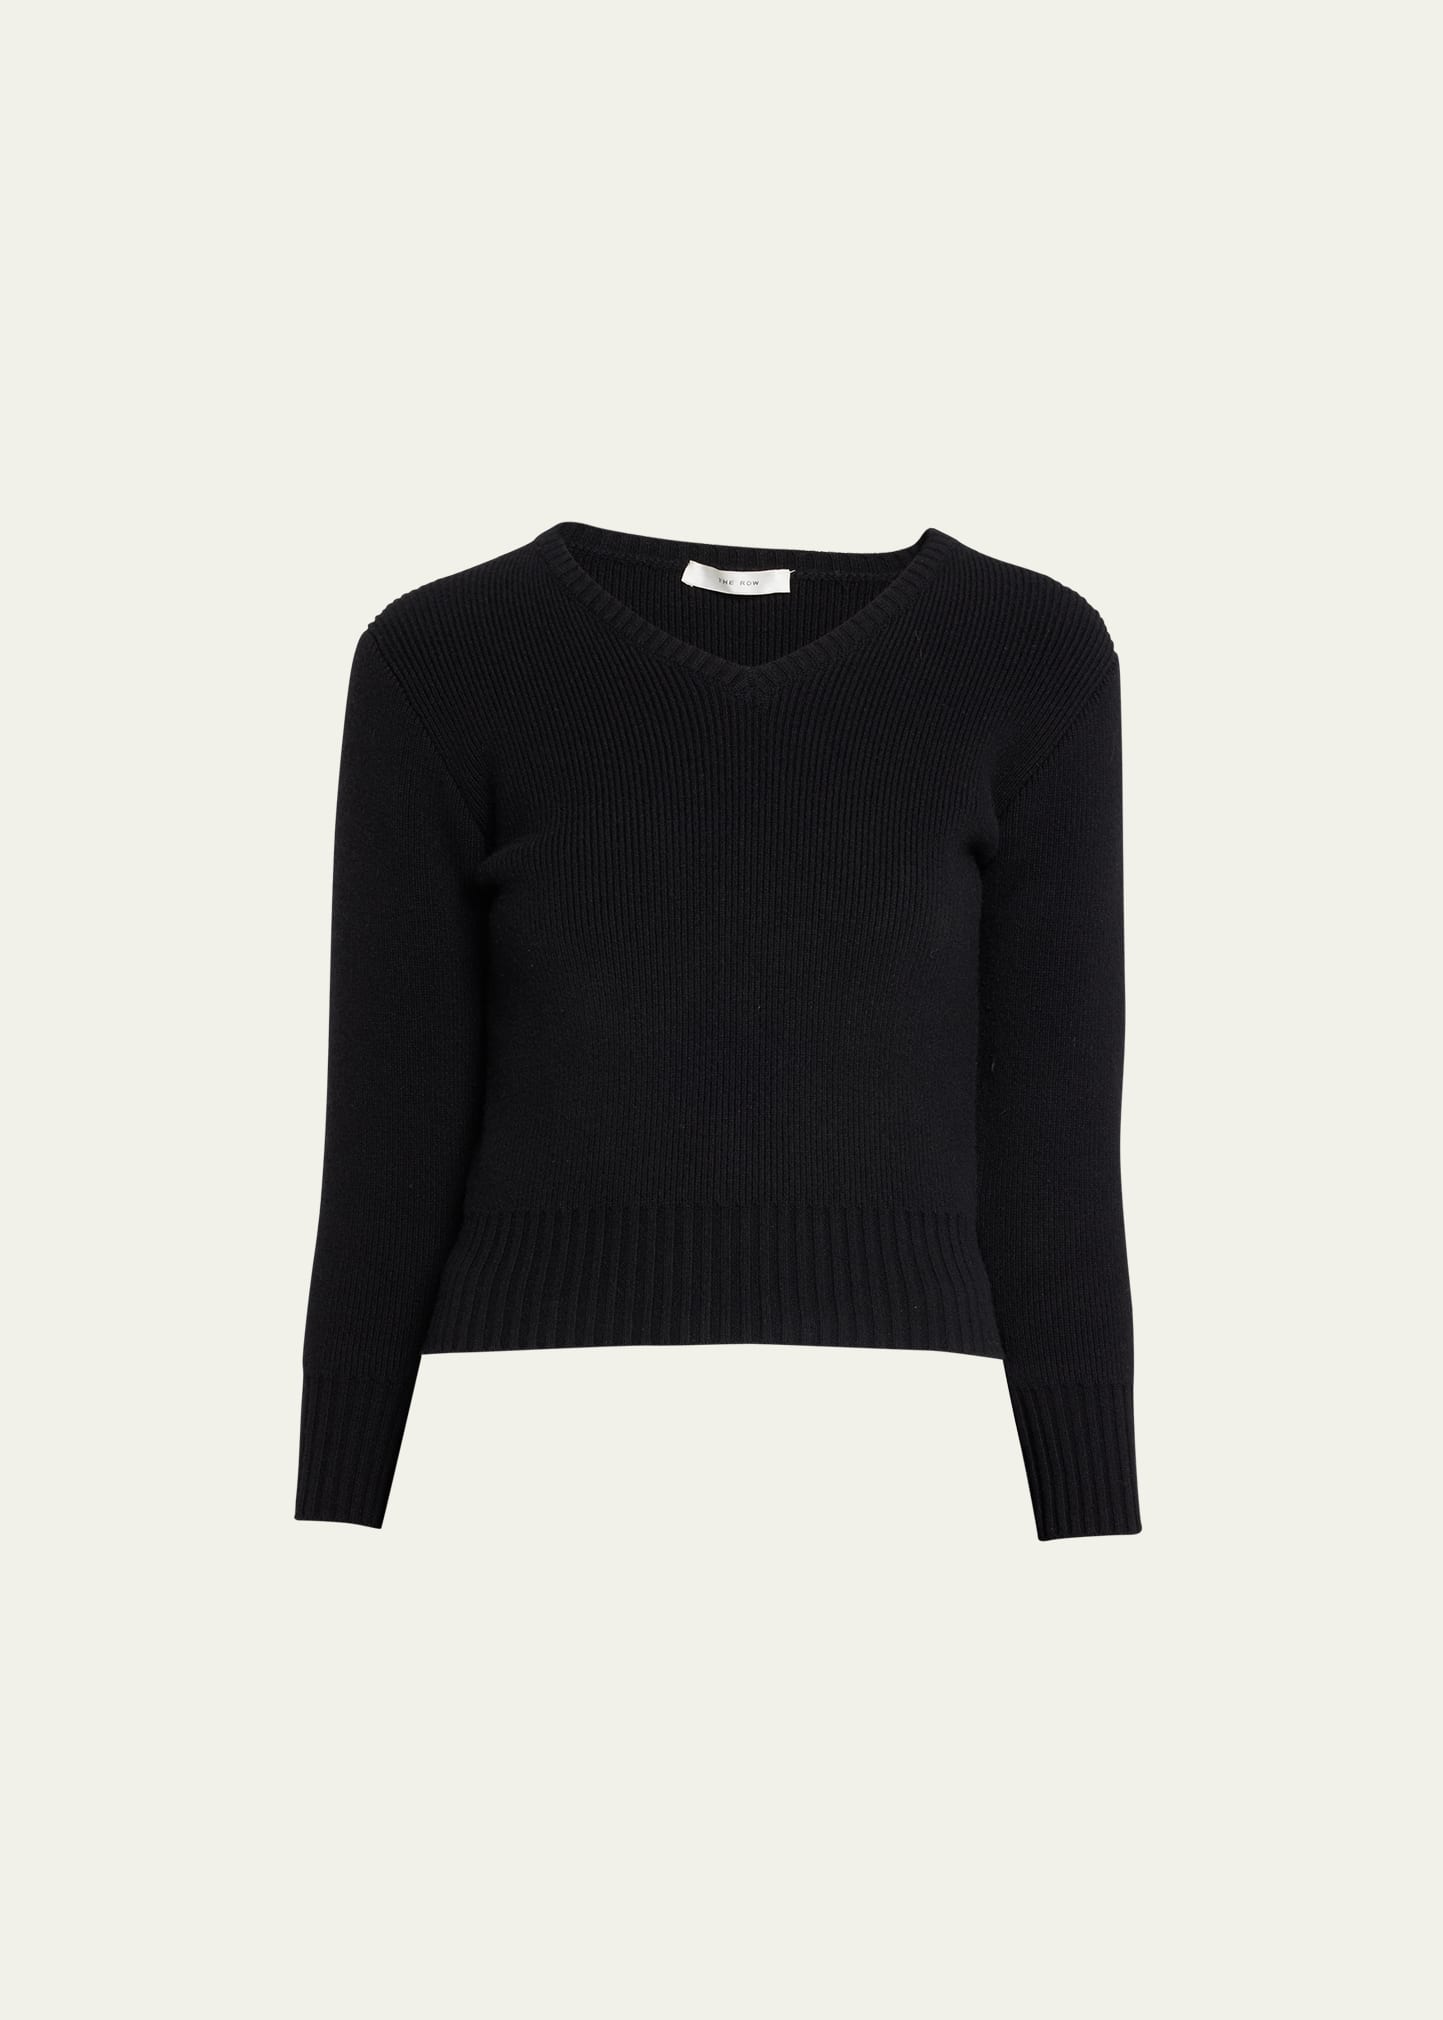 THE ROW CAEL CASHMERE BLEND KNIT TOP